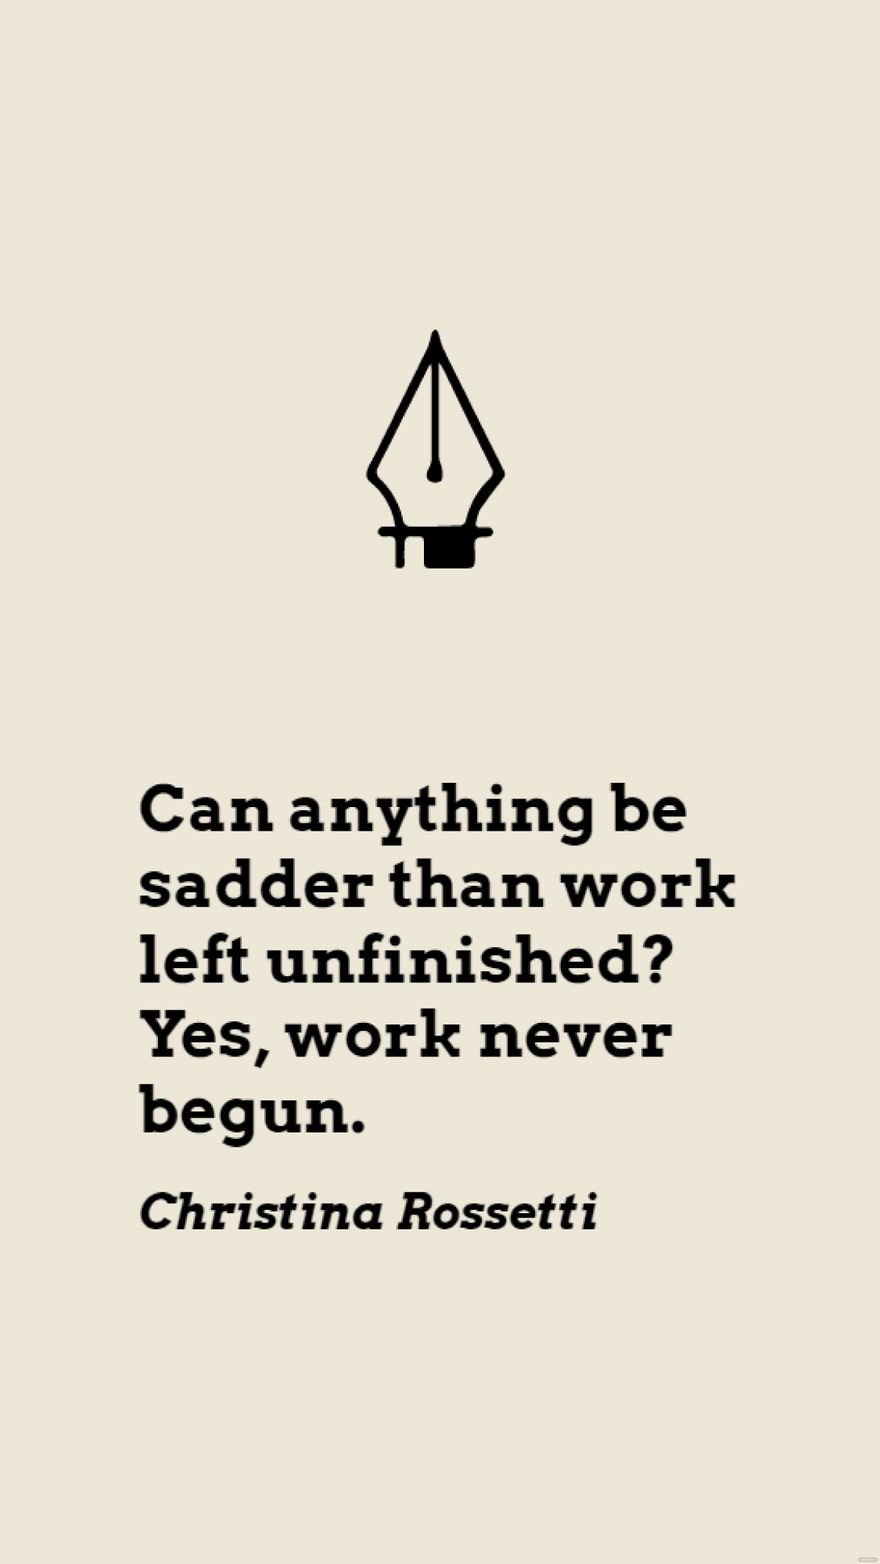 Free Christina Rossetti - Can anything be sadder than work left unfinished? Yes, work never begun. in JPG